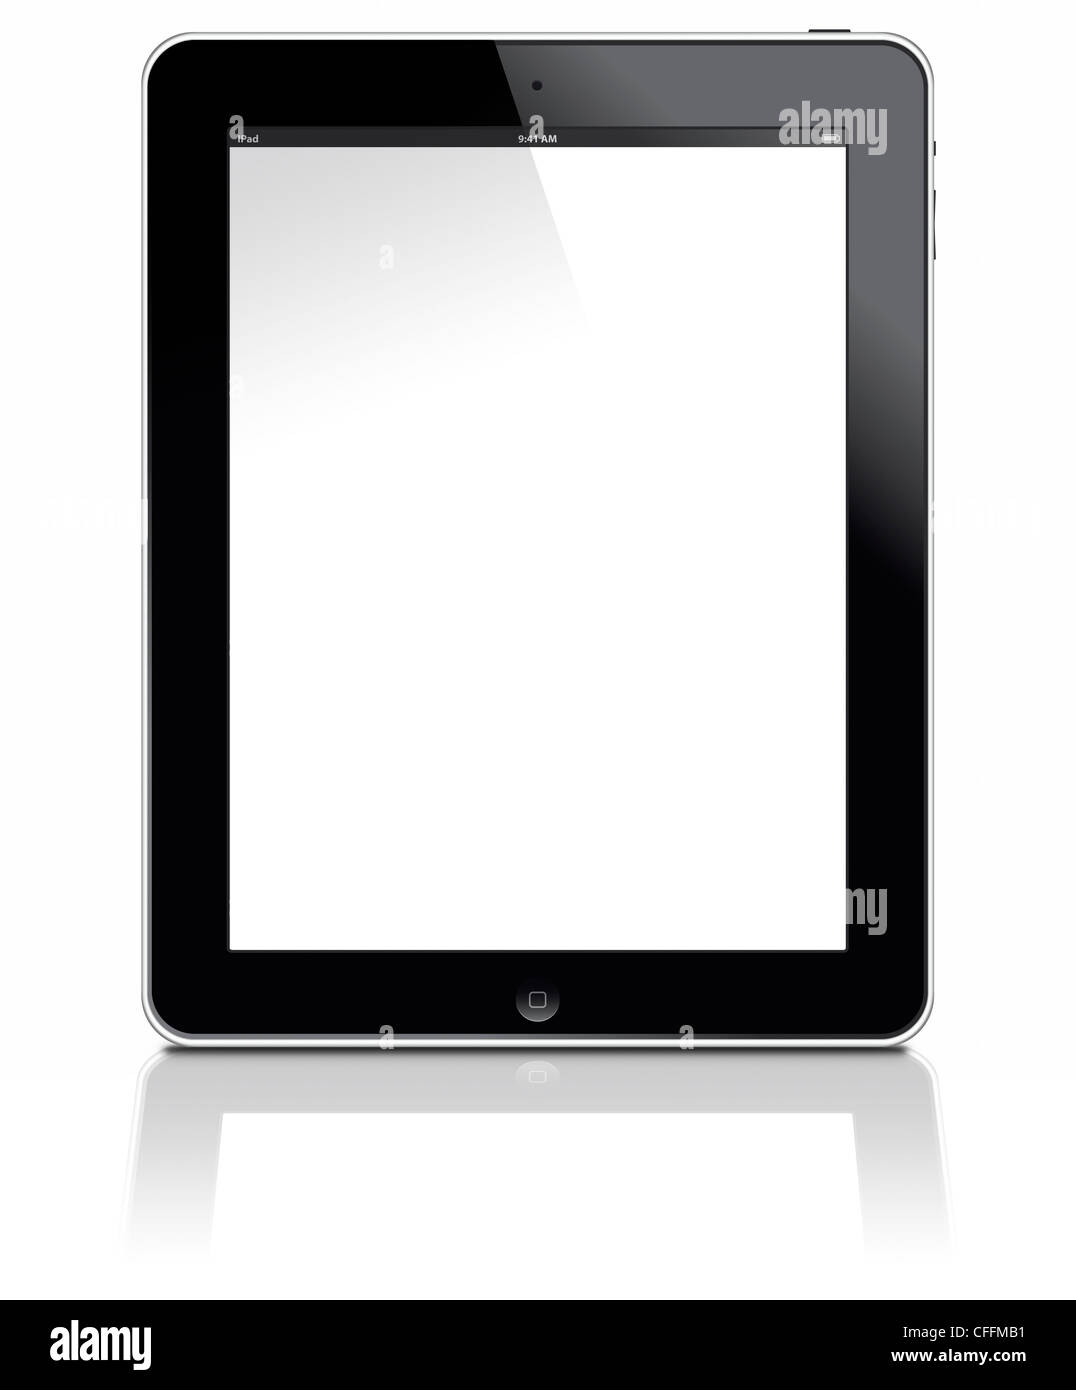 Muenster, Germany - March 12 2012: Pictures shows the Apple ipad 3 digital tablet computer with multi touch screen. Stock Photo